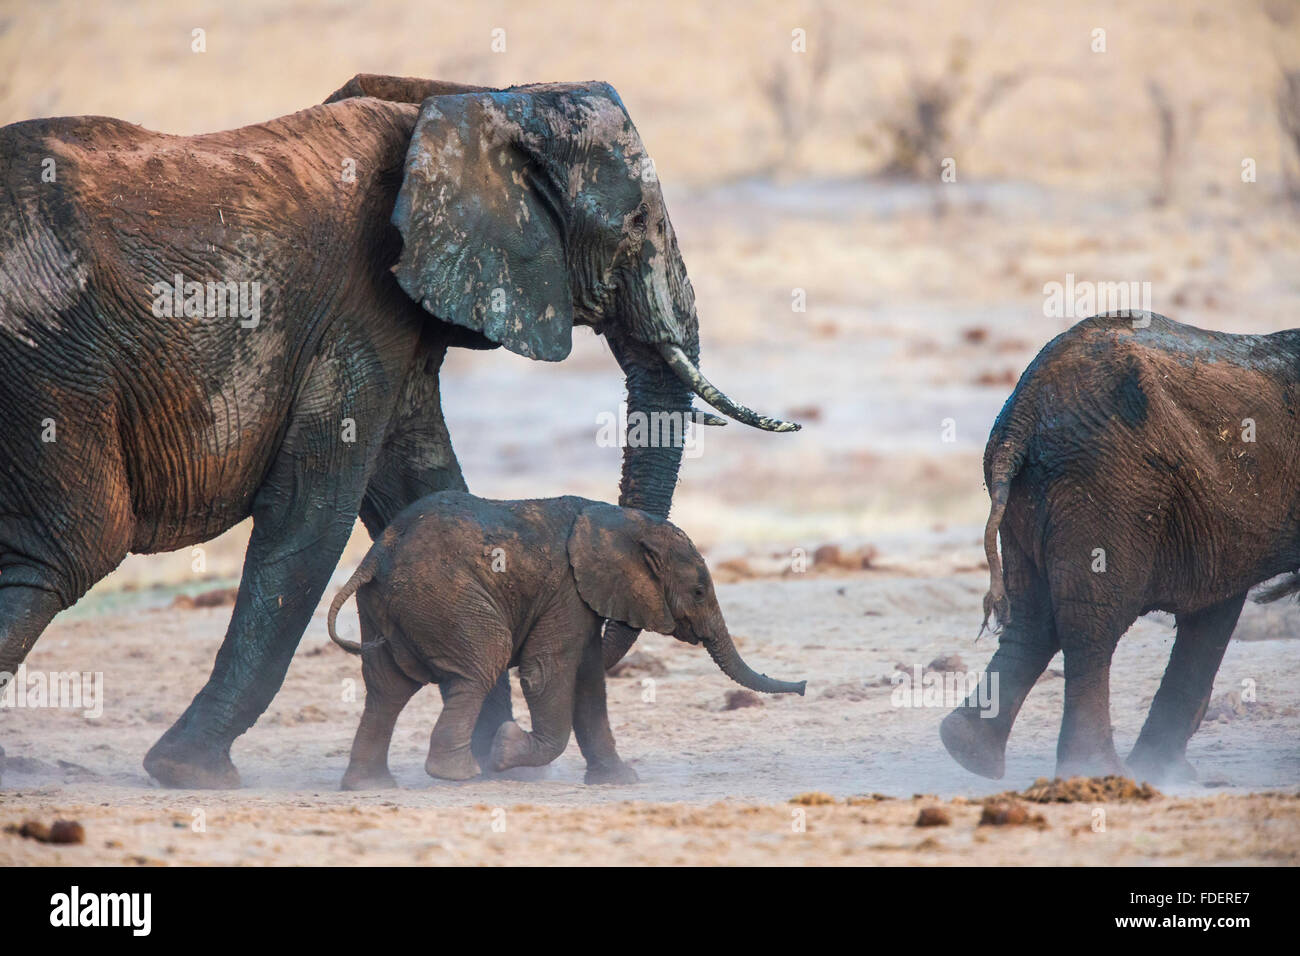 Elephant cow and calf walking side by side after a mudbath Stock Photo